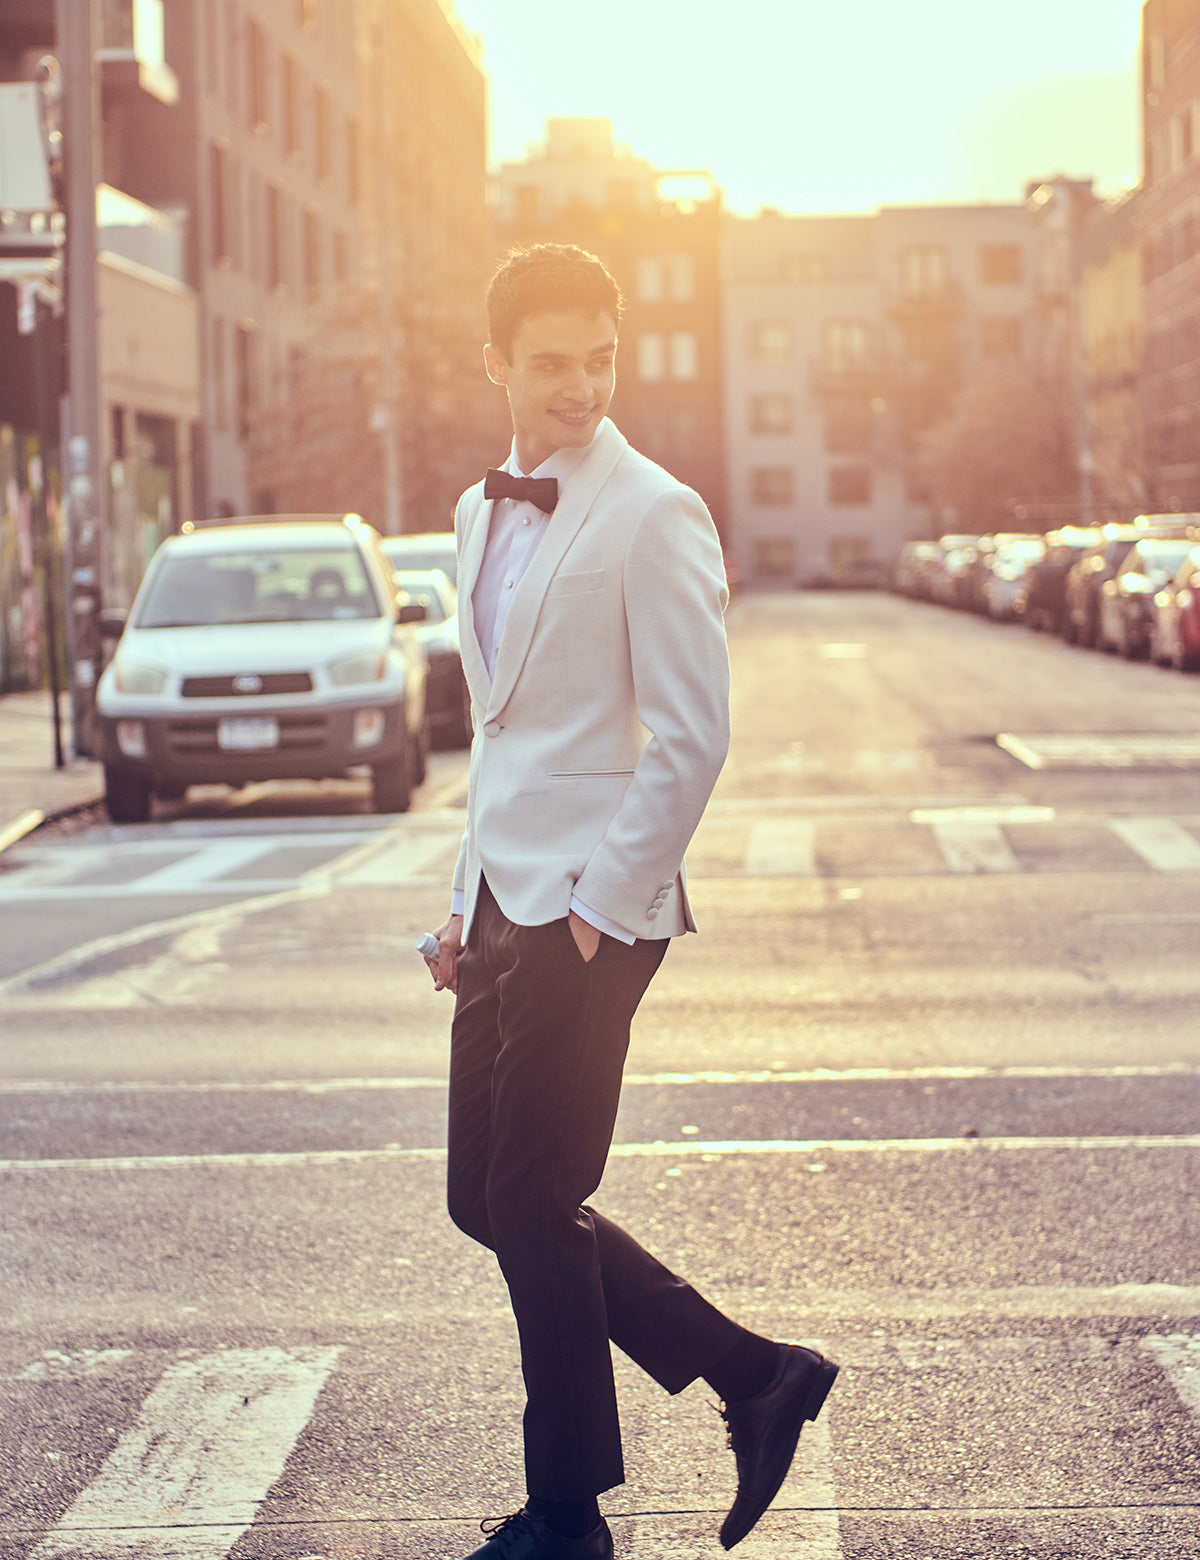 Brooklyn Tailors BKT50 Shawl Collar Dinner Jacket in Silk & Wool Textured Weave - Ivory on-body shot. Model is wearing jacket with black trousers, a white tuxedo shirt, black bowtie, and black dress shoes